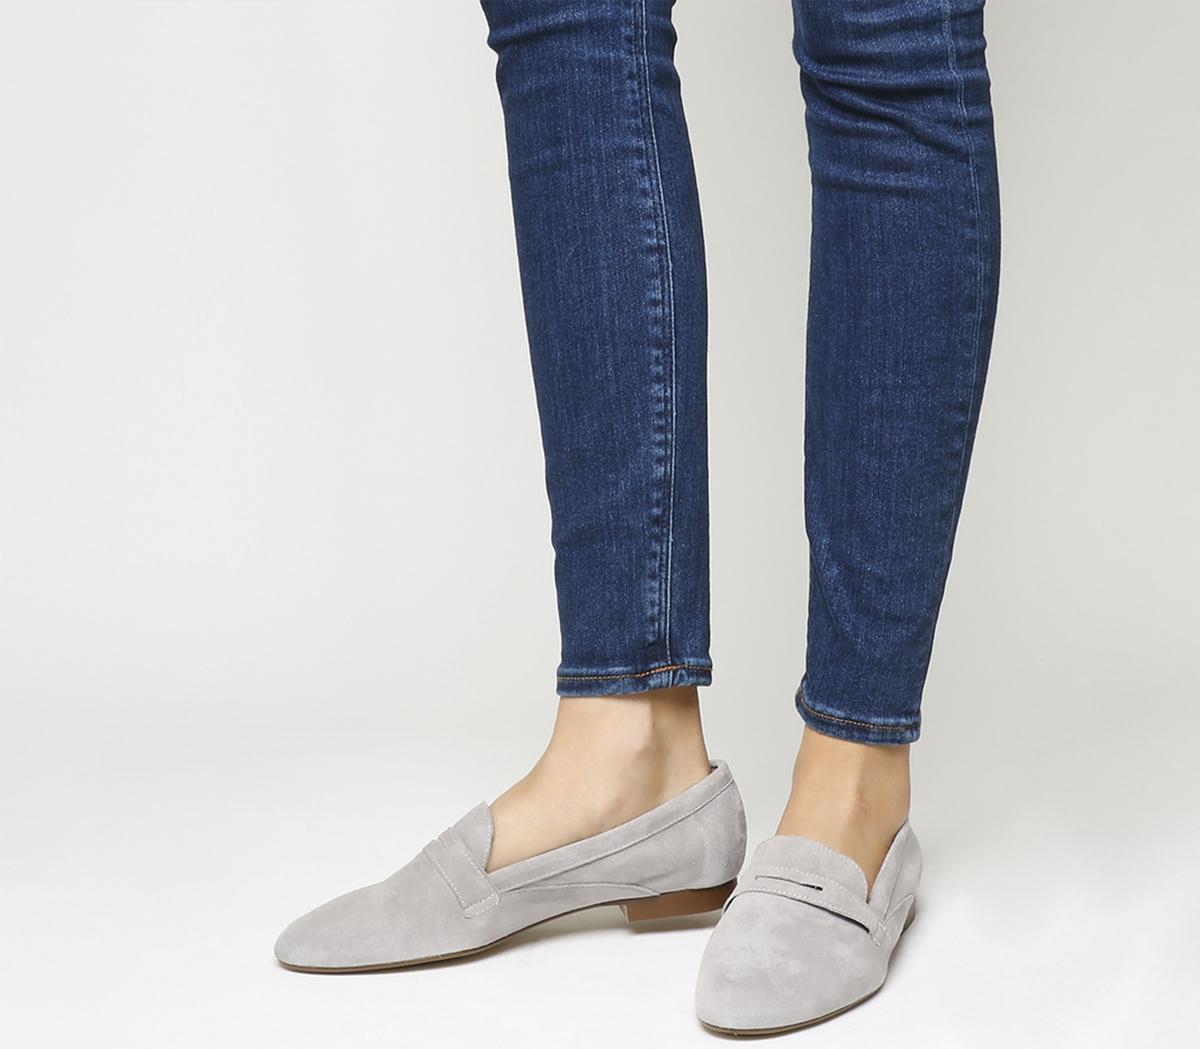 Friction Clean Loafers Grey Suede - Flats